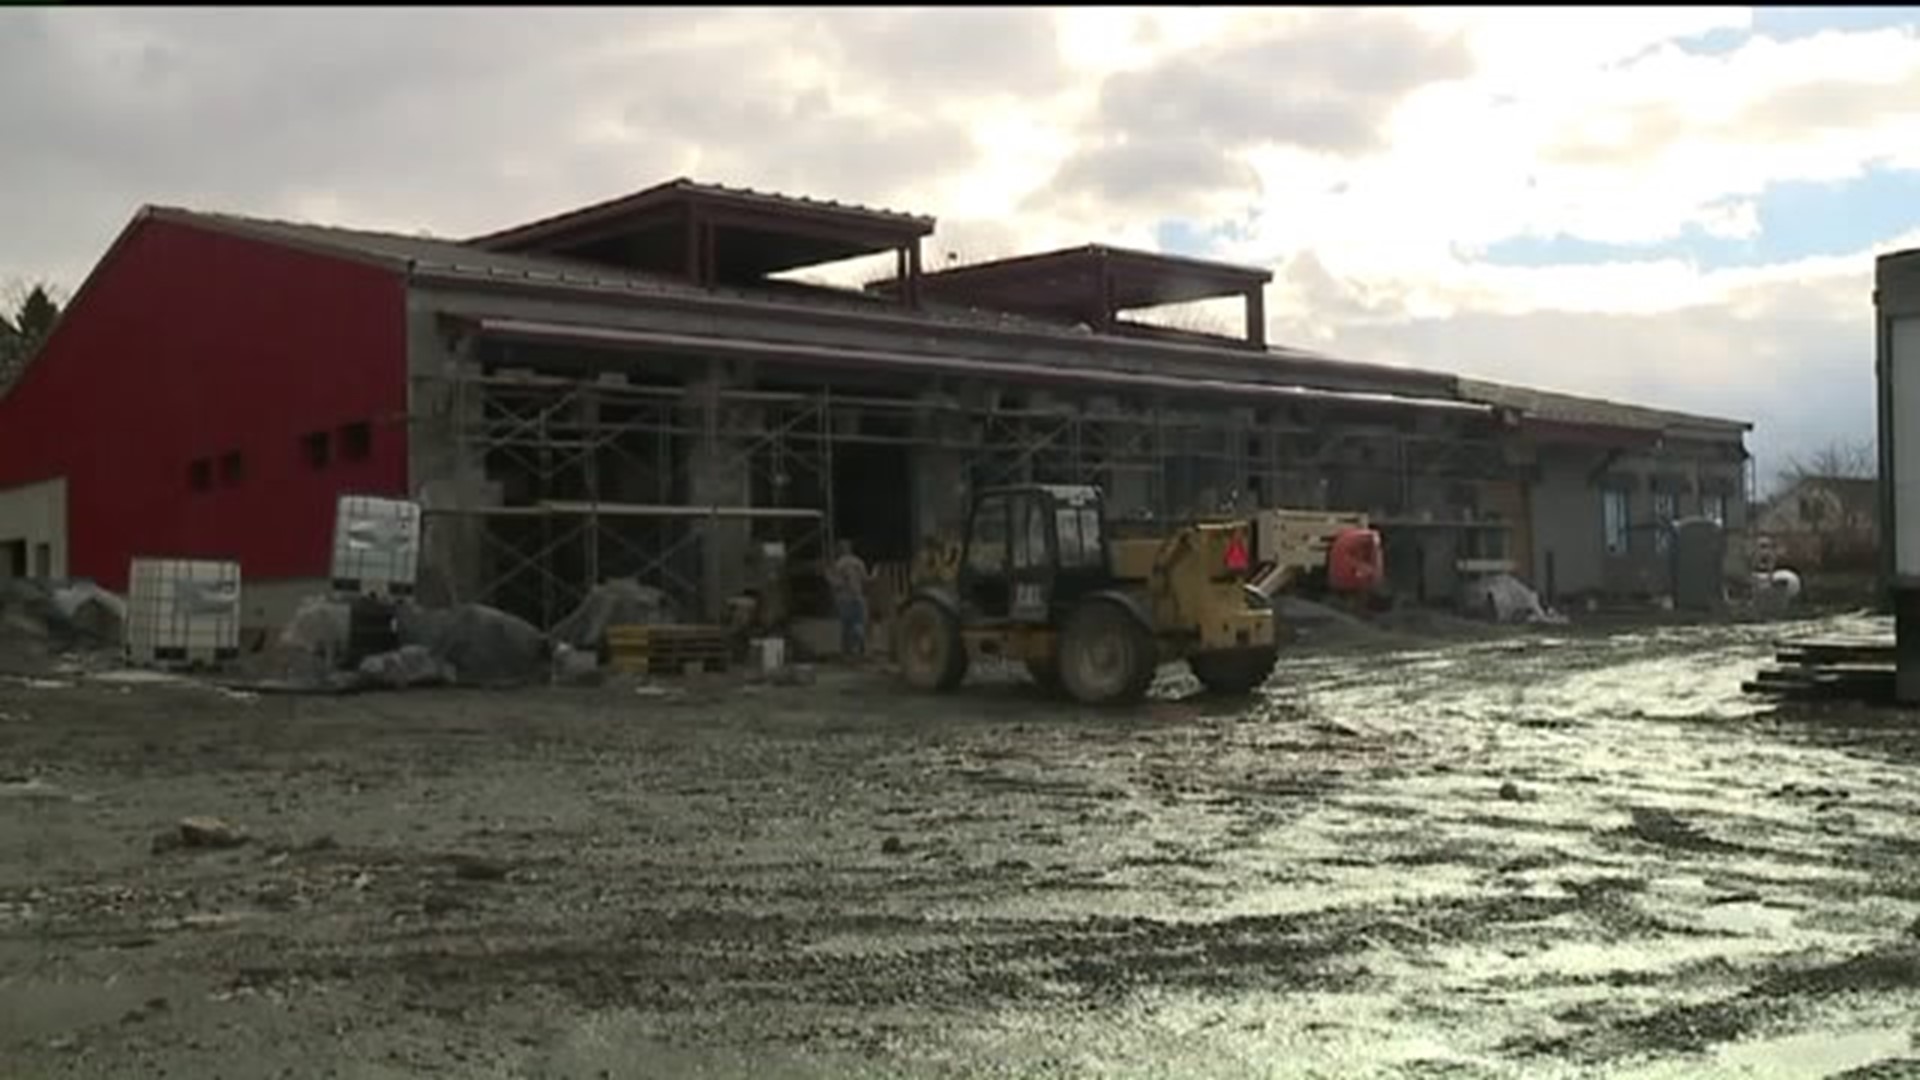 Construction of New Hanover Township Firehouse Months Ahead of Schedule